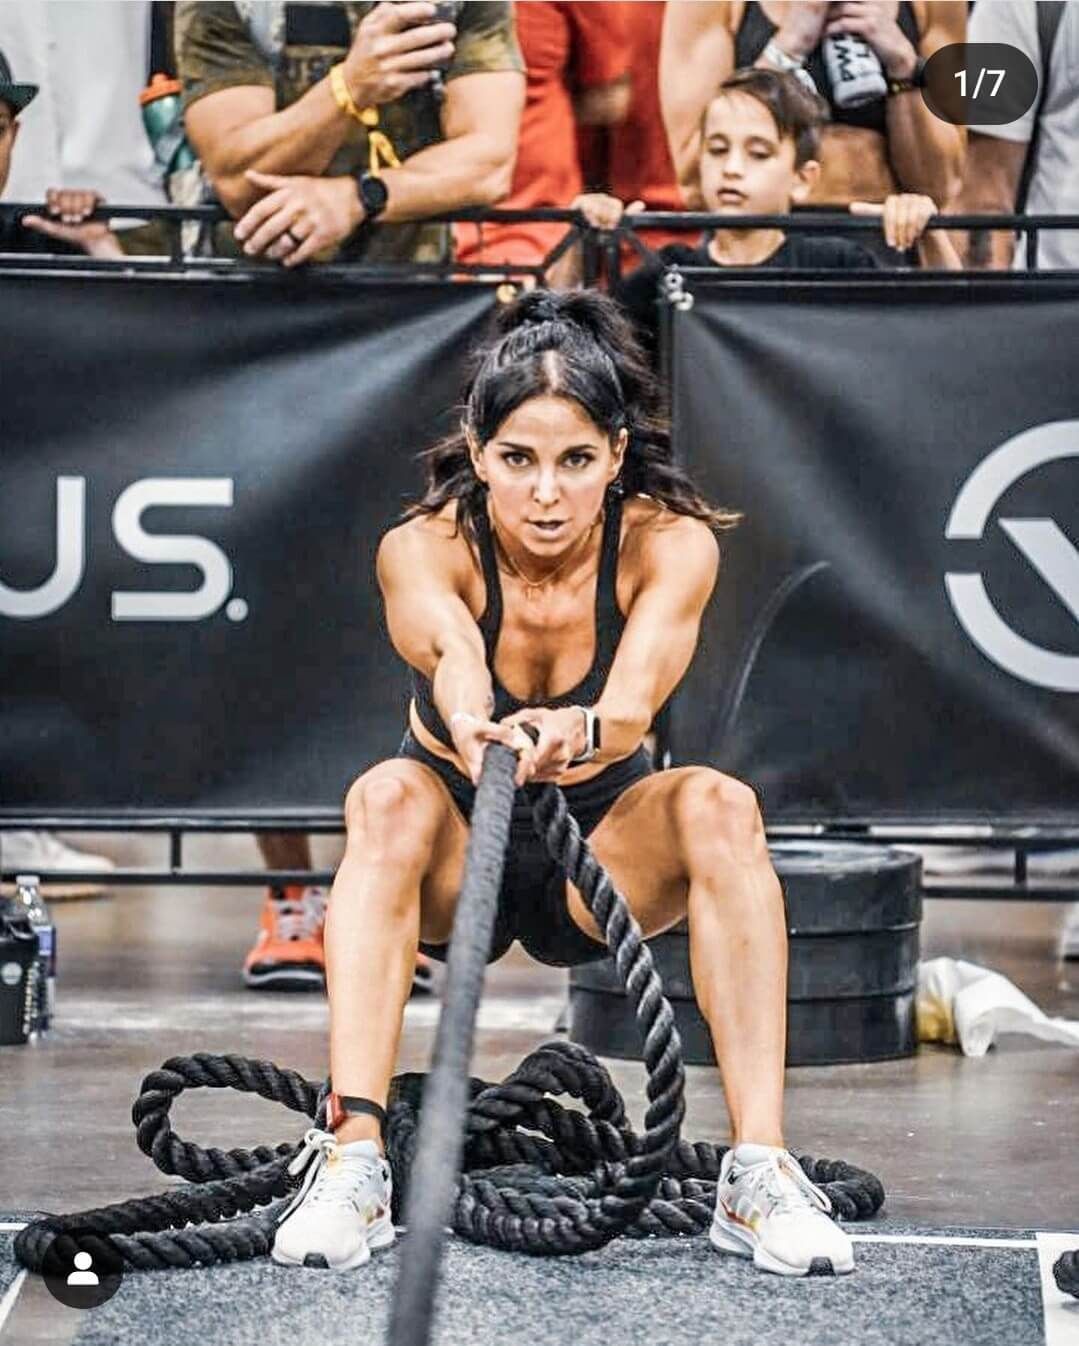 A woman athlete from Team Olympia Performance is pulling a rope during a HYROX competition event